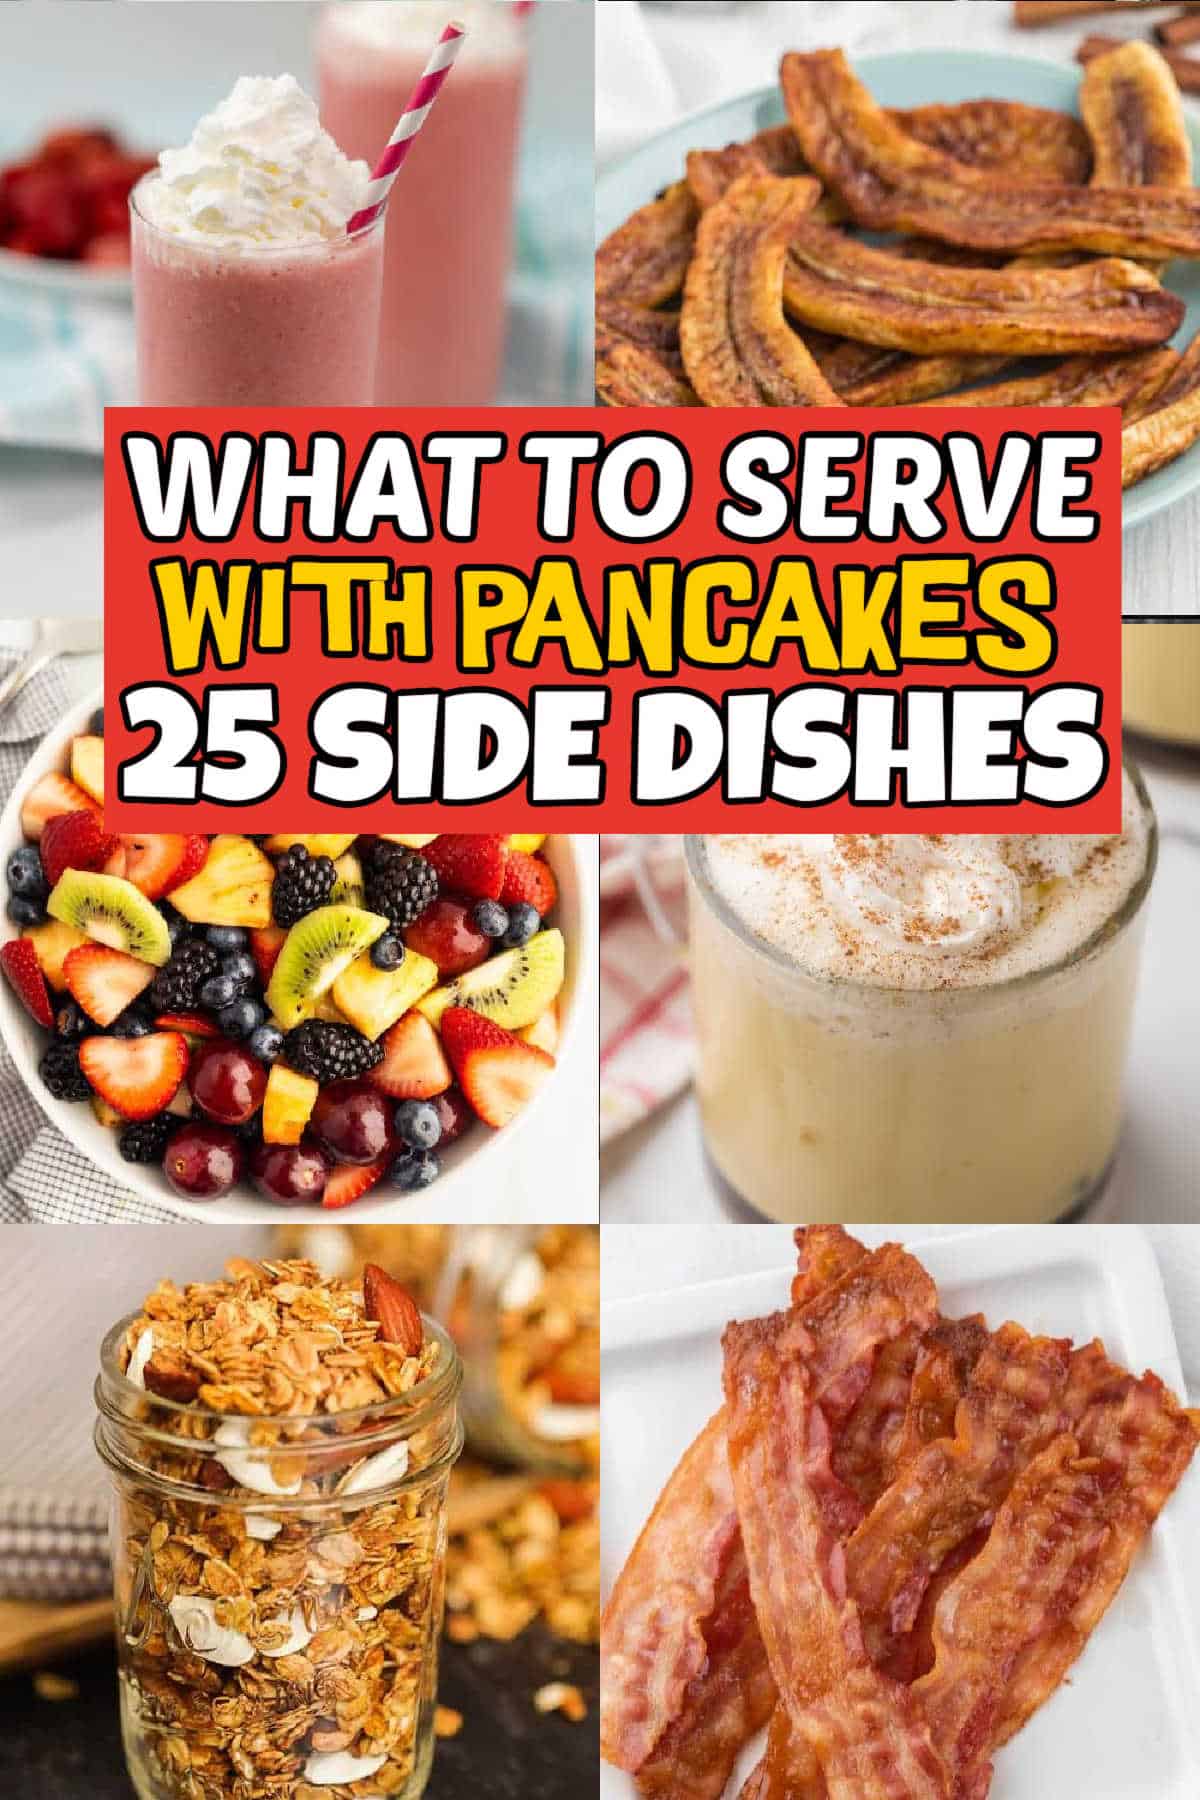 You will find delicious ideas on What to Serve with Pancakes. From homemade syrup, to fresh fruit, and sausage you will find the perfect sides. These 25 side dish recipes will complete any pancake breakfast and they are easy to make.  #eatingonadime #whattoservewithpancakes #pancakesidedishes